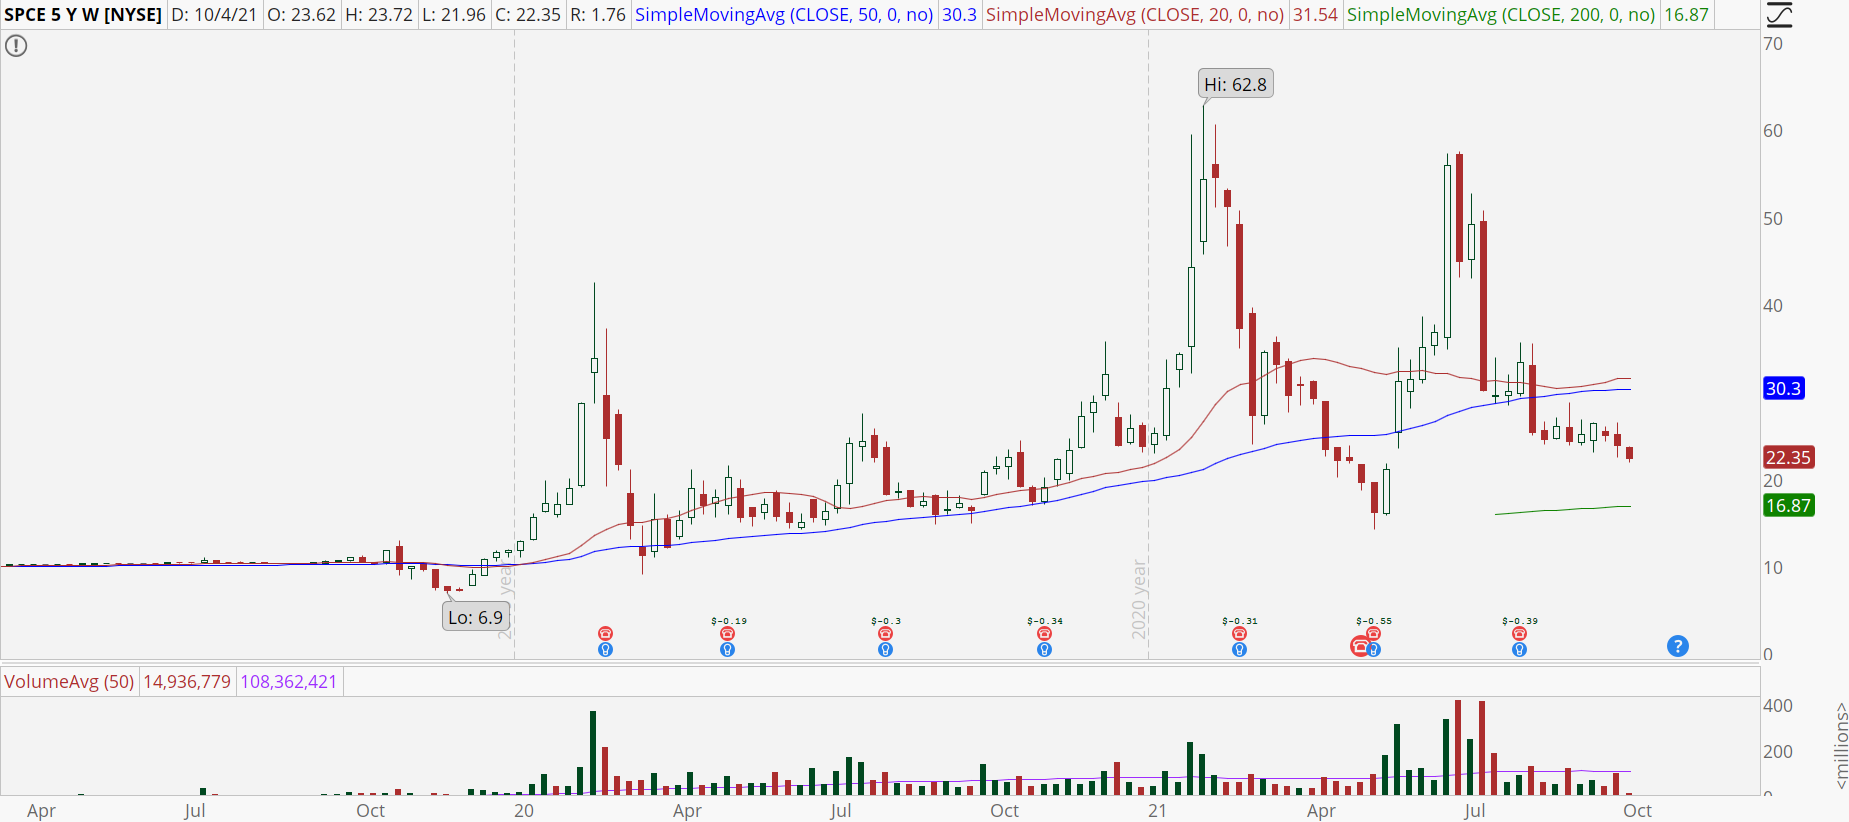 Virgin Galactic Holdings (SPCE) weekly stock chart with epic volatility